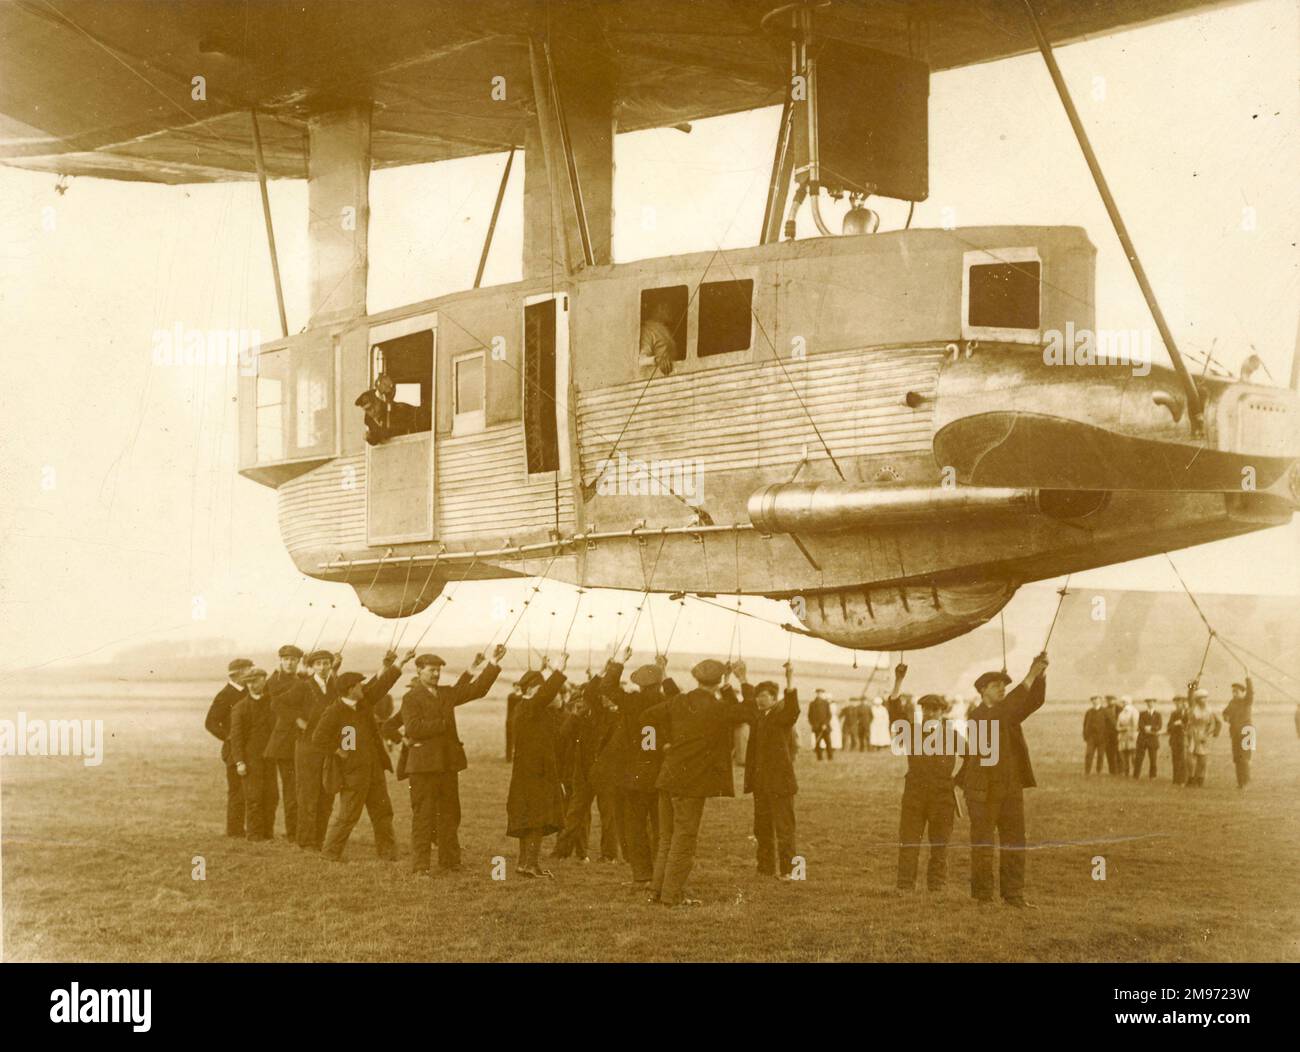 The forward gondola of the R34. The airship is being eased up, preparatory to flight, when the lines held by the groundcrew will be released from the handling rail. 14 March 1919 (the first flight). Stock Photo